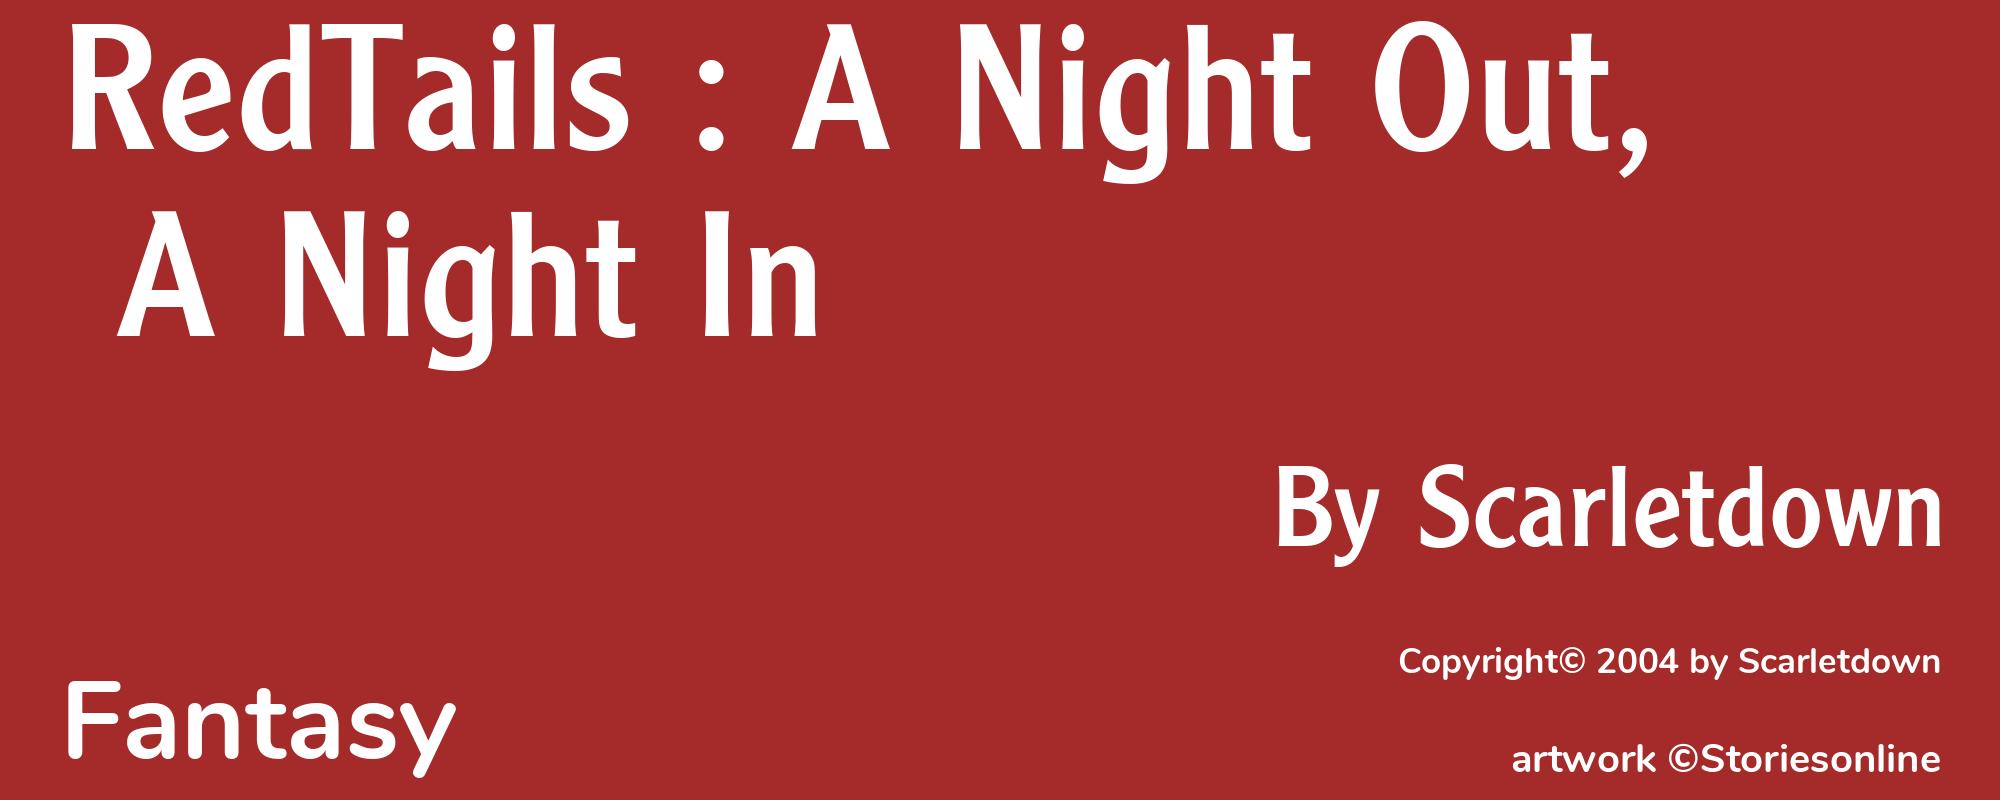 RedTails : A Night Out, A Night In - Cover